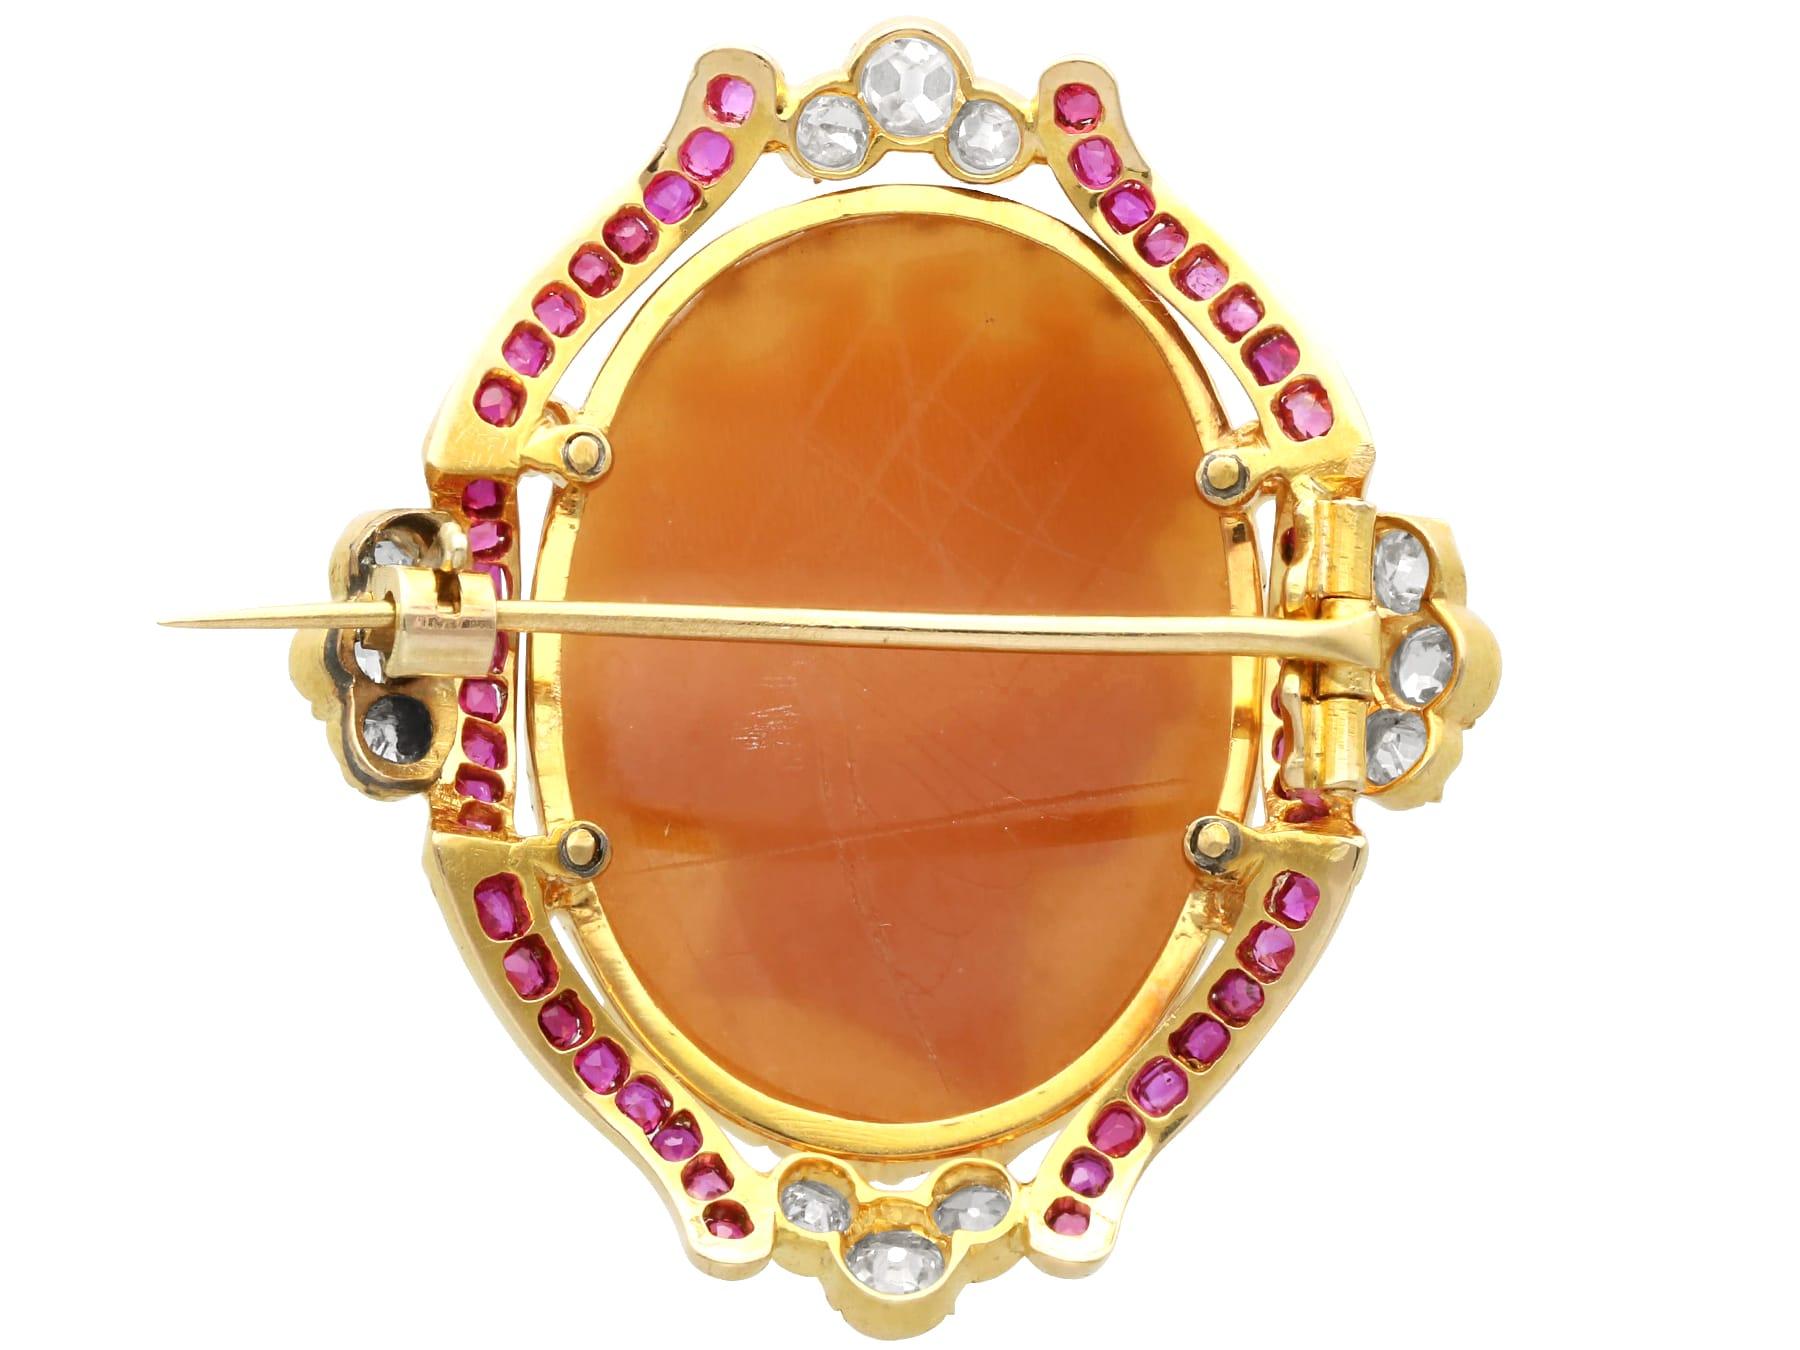 Antique Shell 0.72 Carat Ruby and 0.78 Carat Diamond Yellow Gold Cameo Brooch In Excellent Condition For Sale In Jesmond, Newcastle Upon Tyne